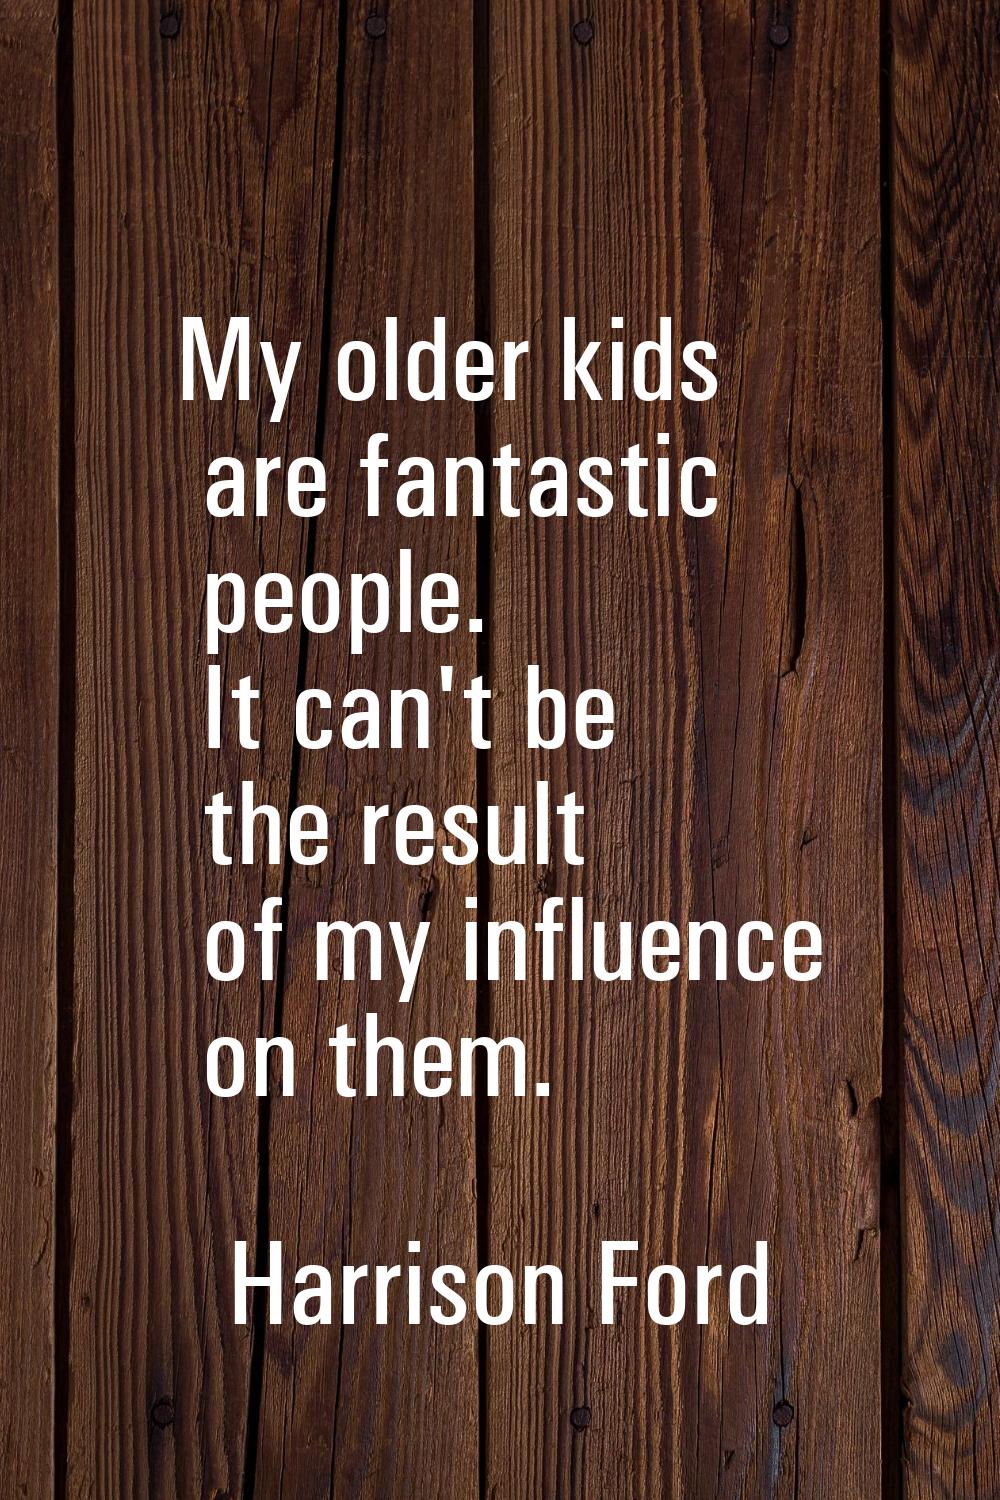 My older kids are fantastic people. It can't be the result of my influence on them.